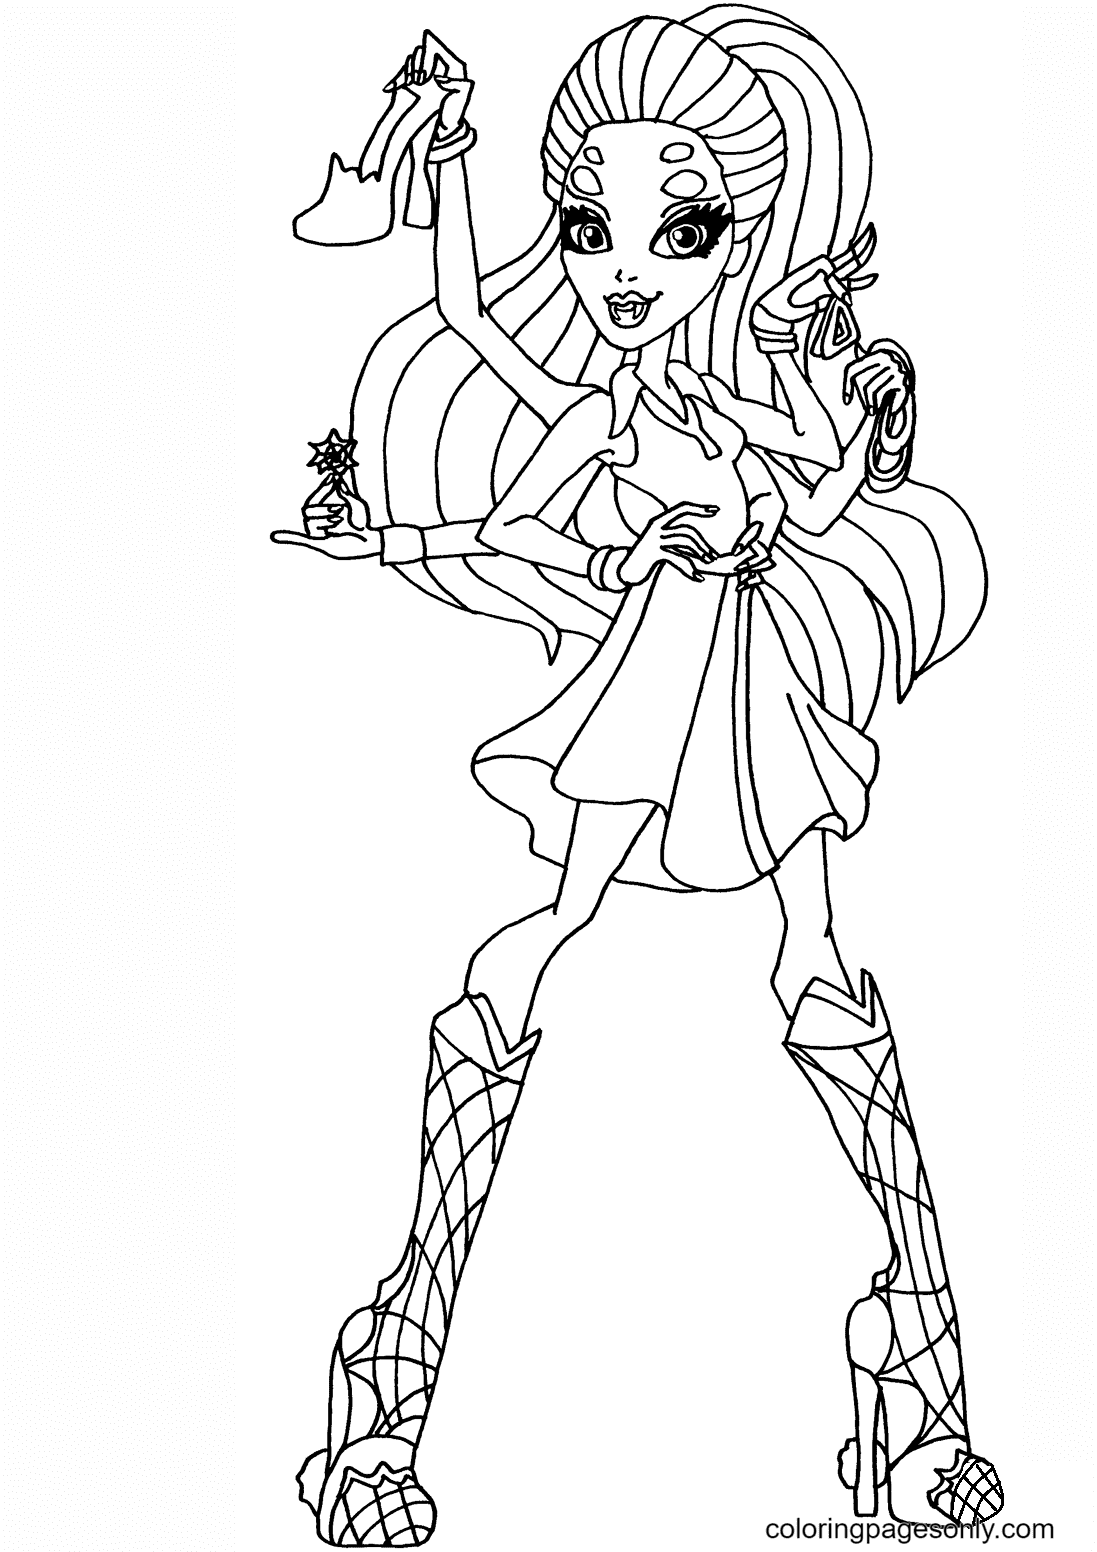 Wydowna Spider Coloring Pages